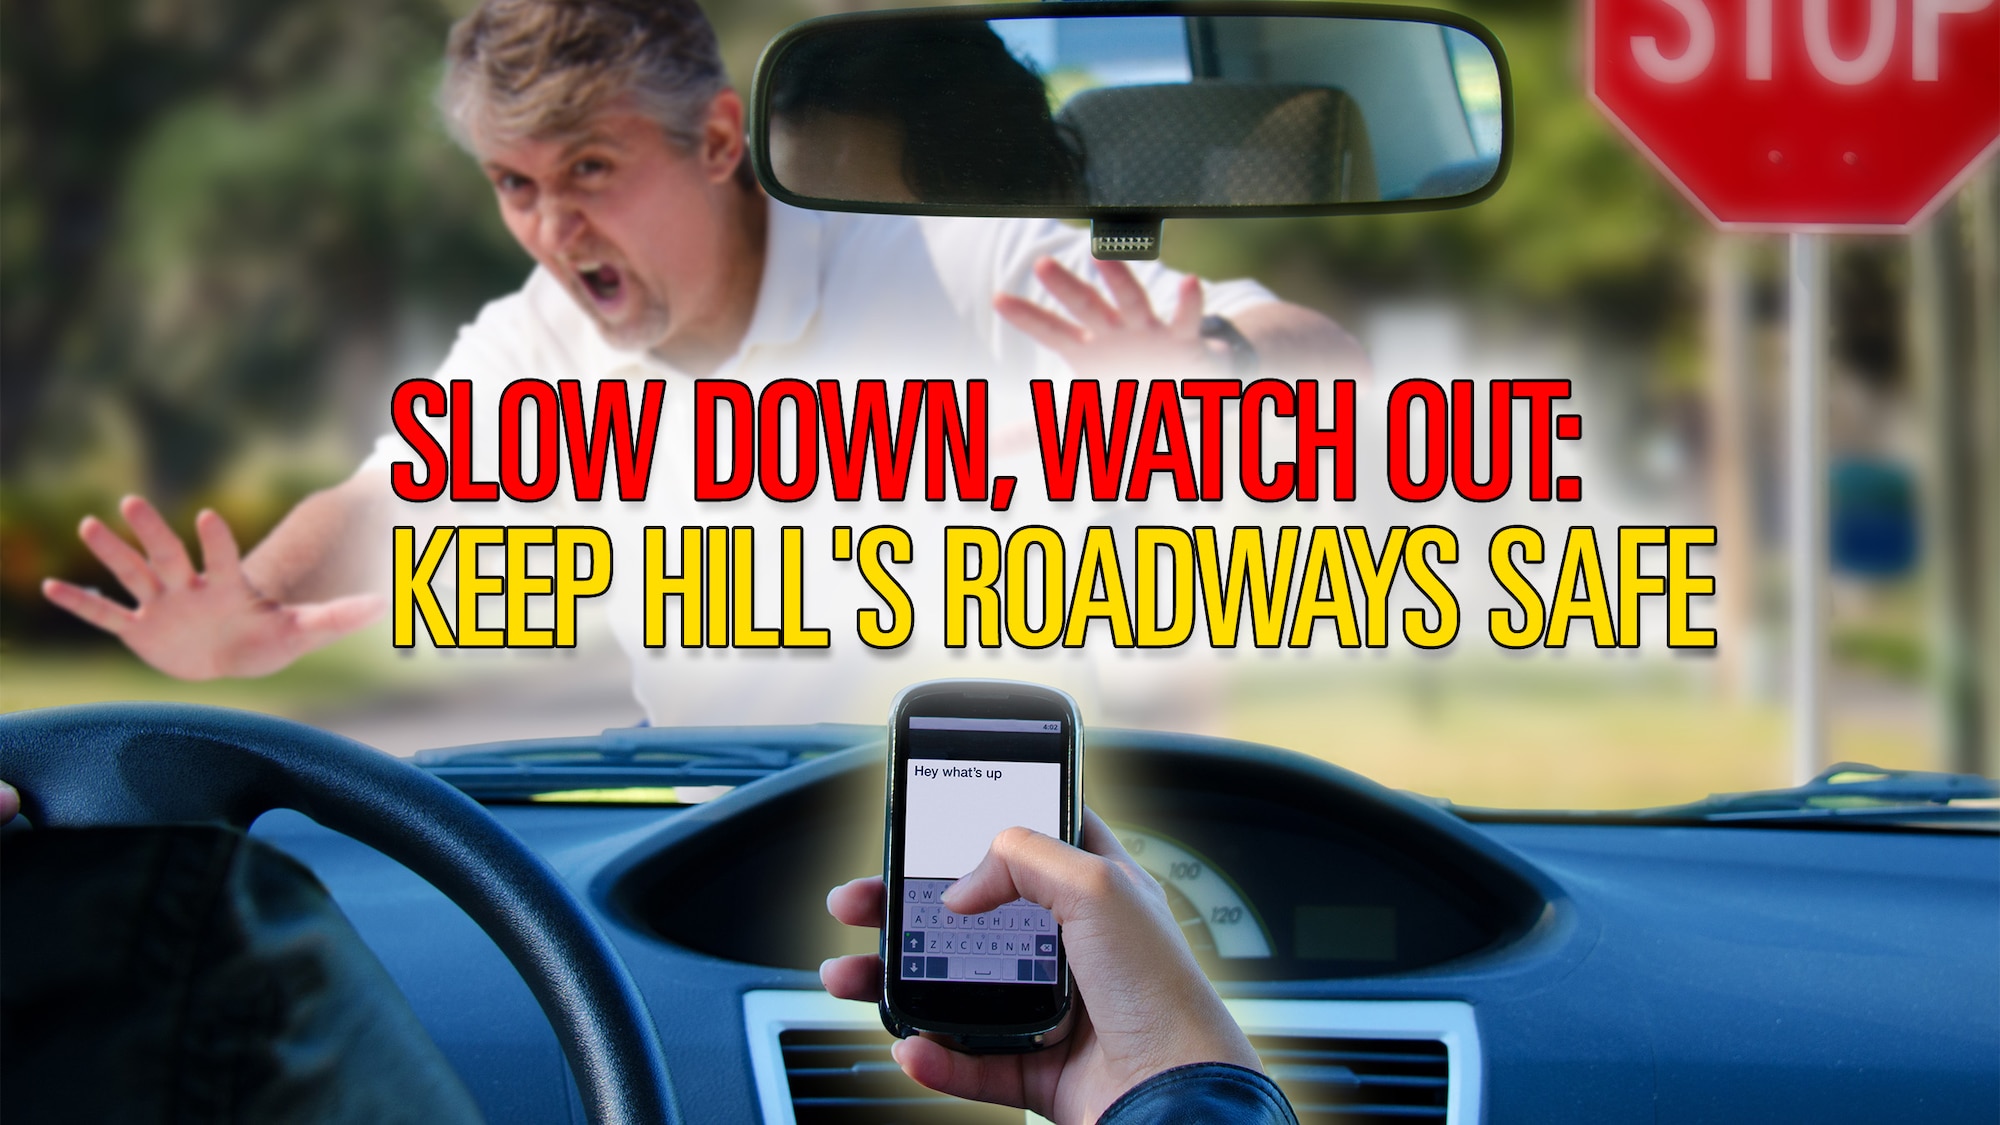 A texting driver behind the wheel is about to hit a pedestrian. The words "Slow down, watch out: Keep Hill's roadways safe" appear over the image.